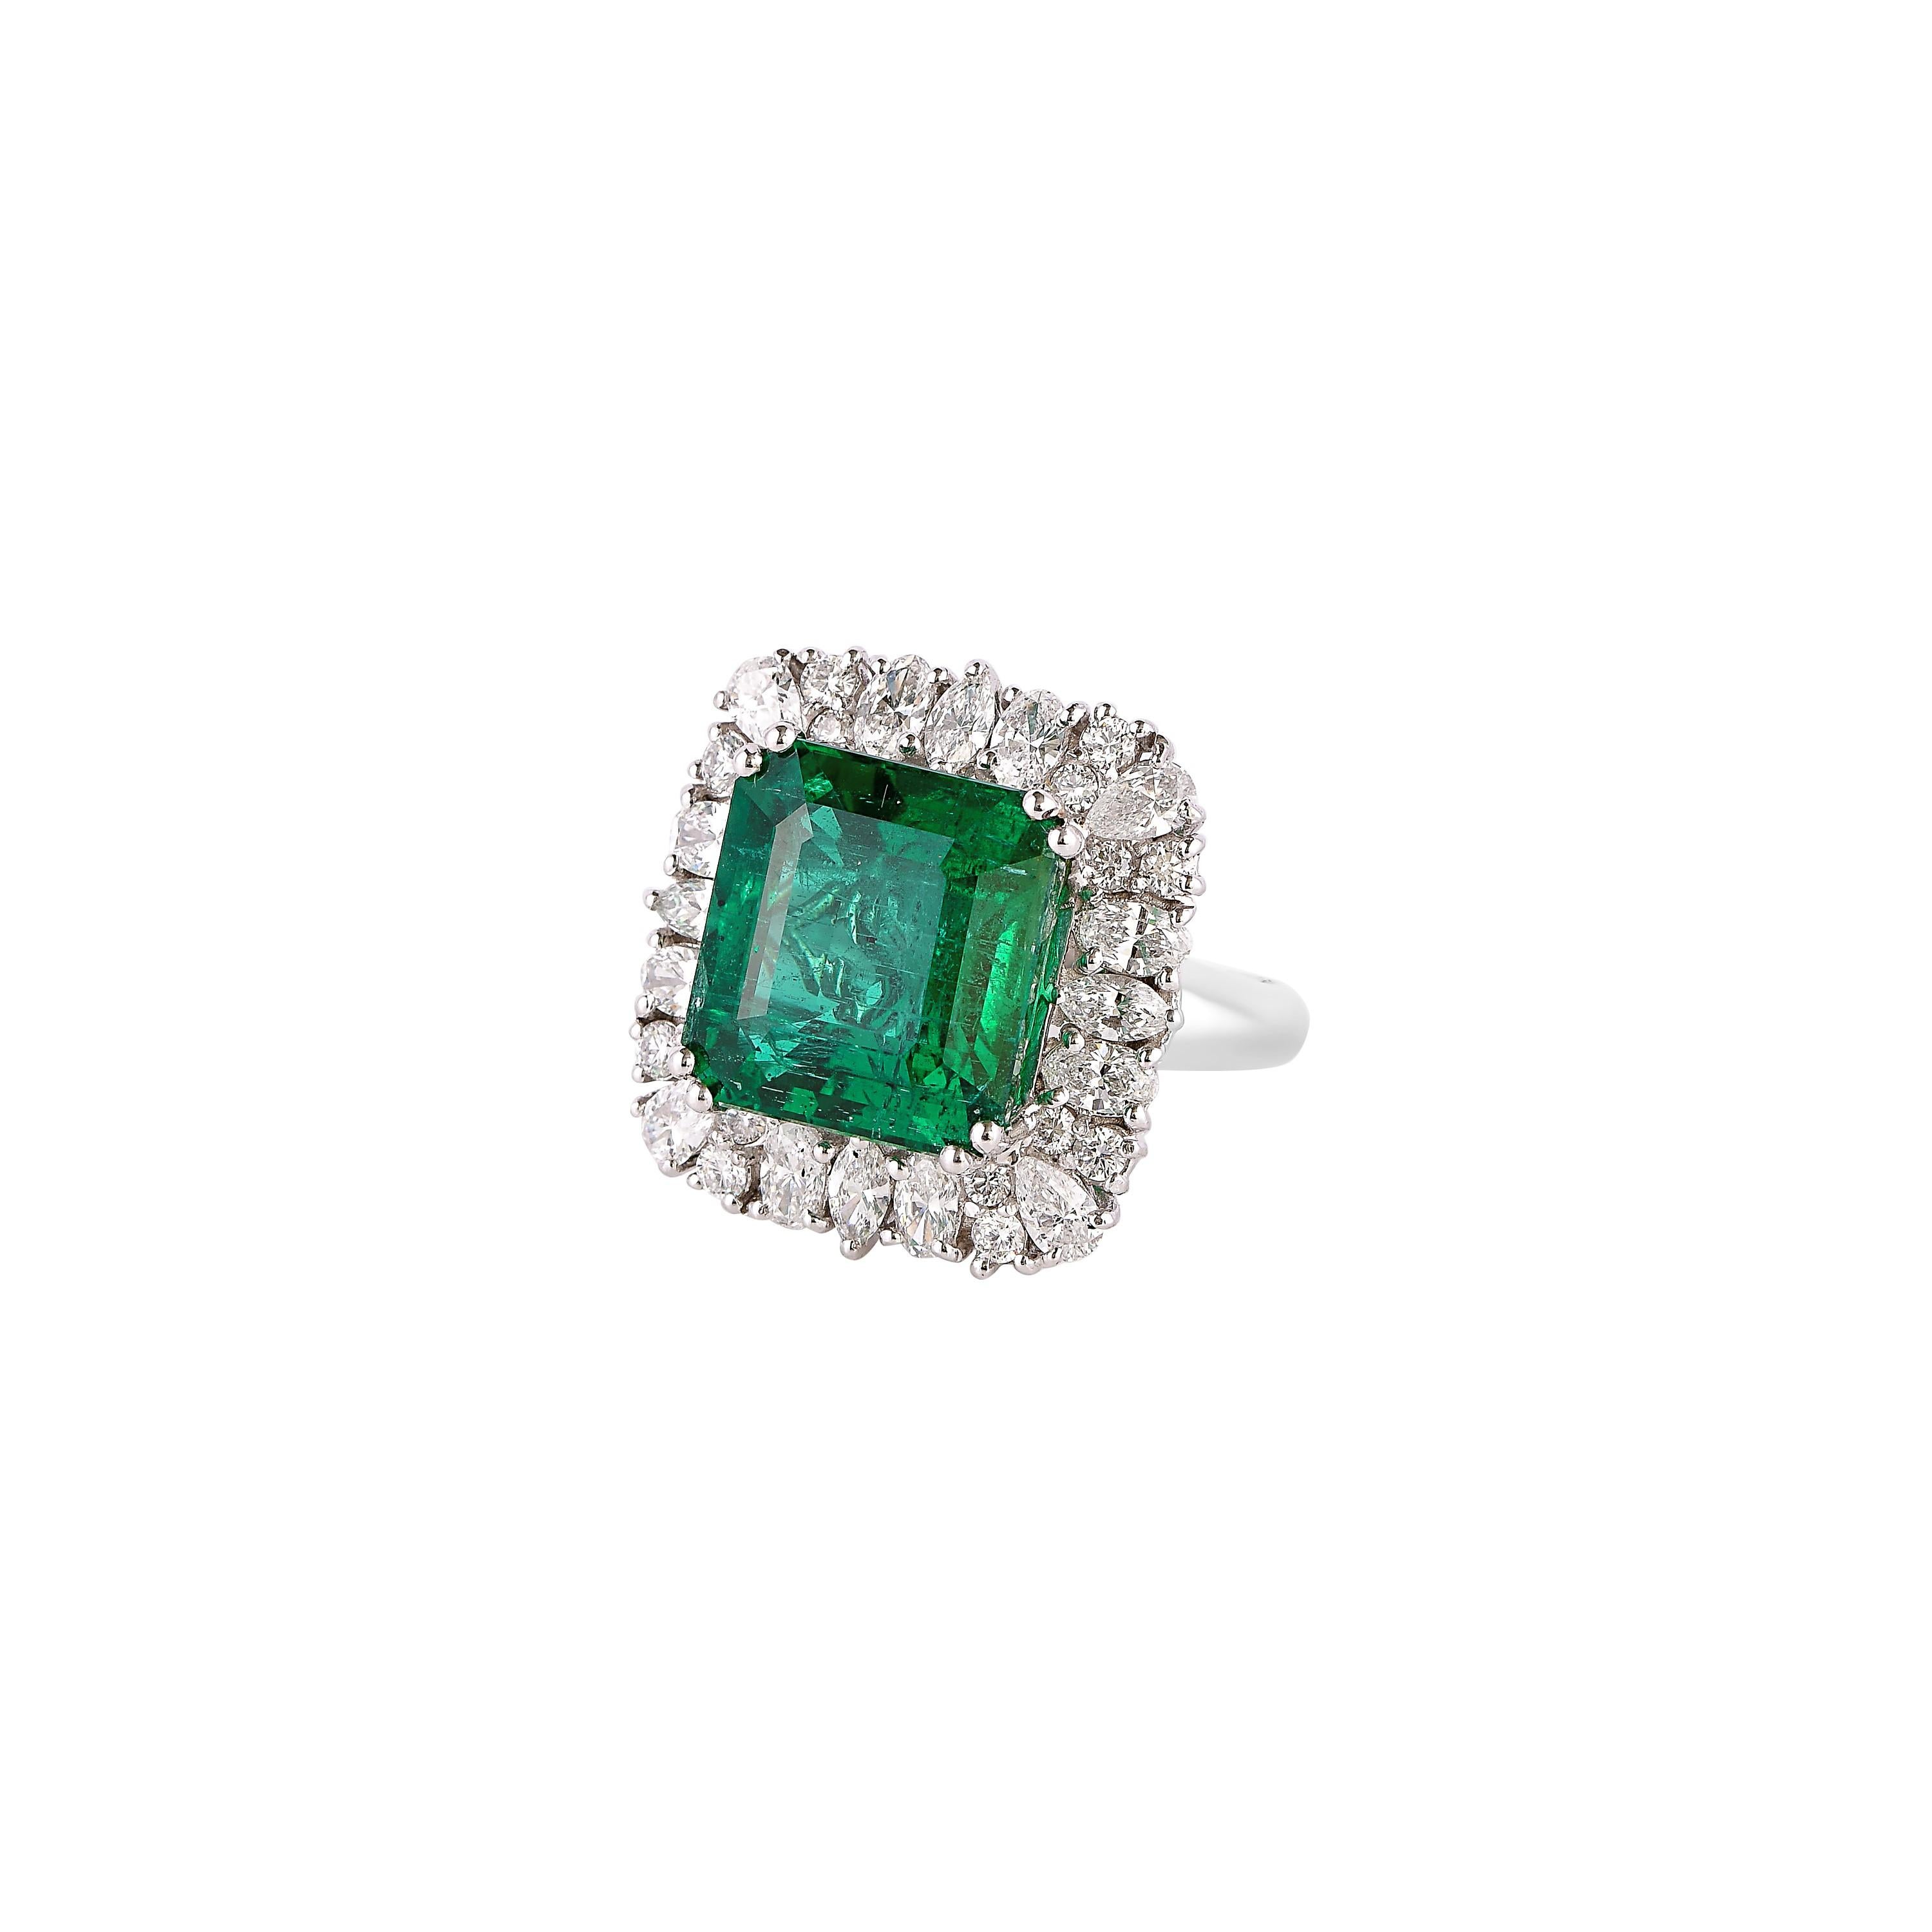 Showcasing the most vibrant Columbian and Zambian emeralds and diamonds, Sunita Nahata dedicates this collection to her home city of Jaipur where the jewelry industry dates back to the early 1700s. Jaipur is also an epicenter for the global emerald